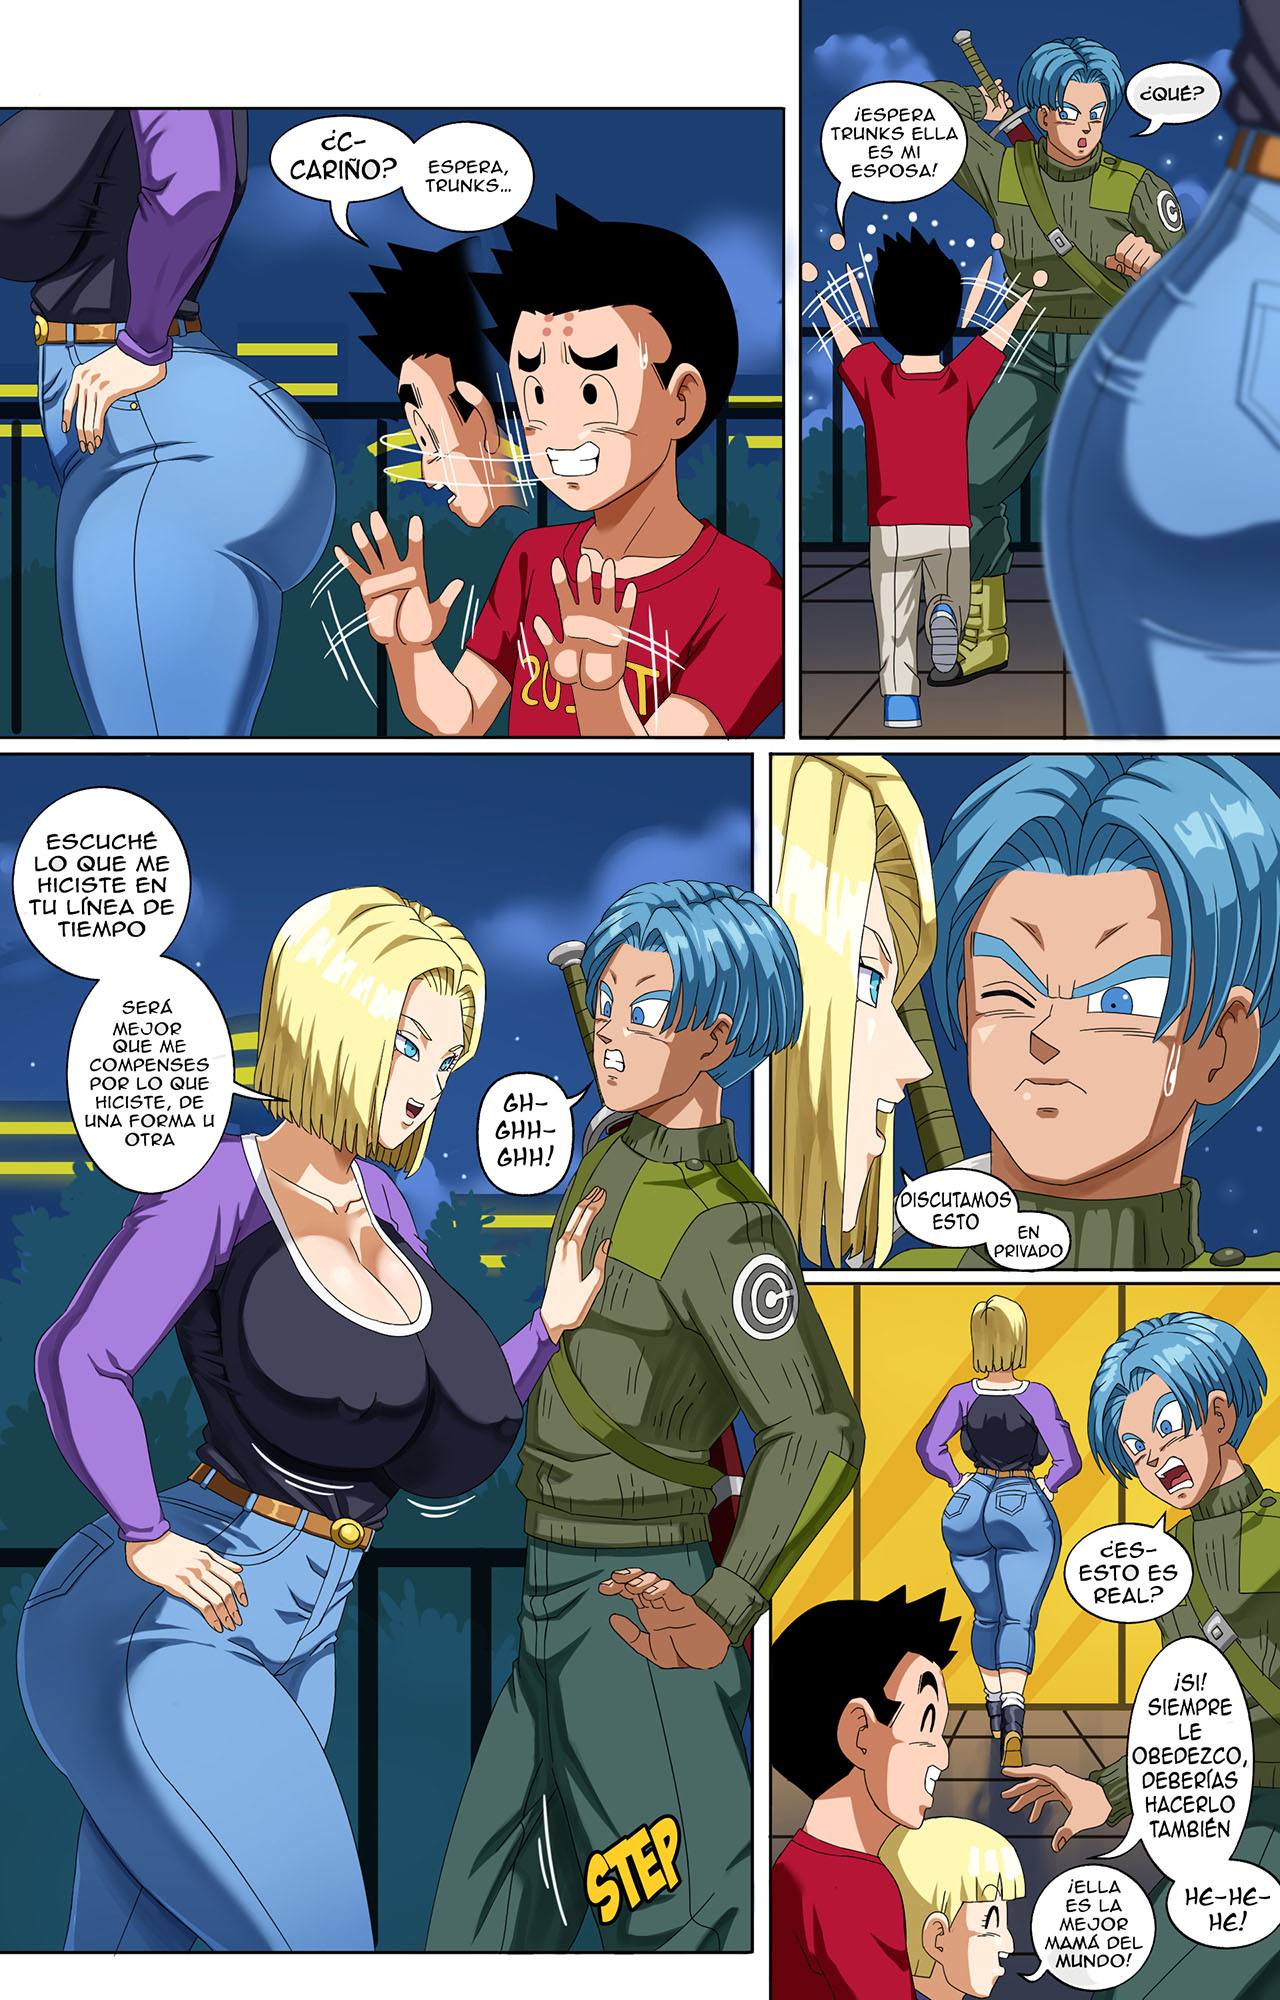 Meeting ANDROID 18 yet again